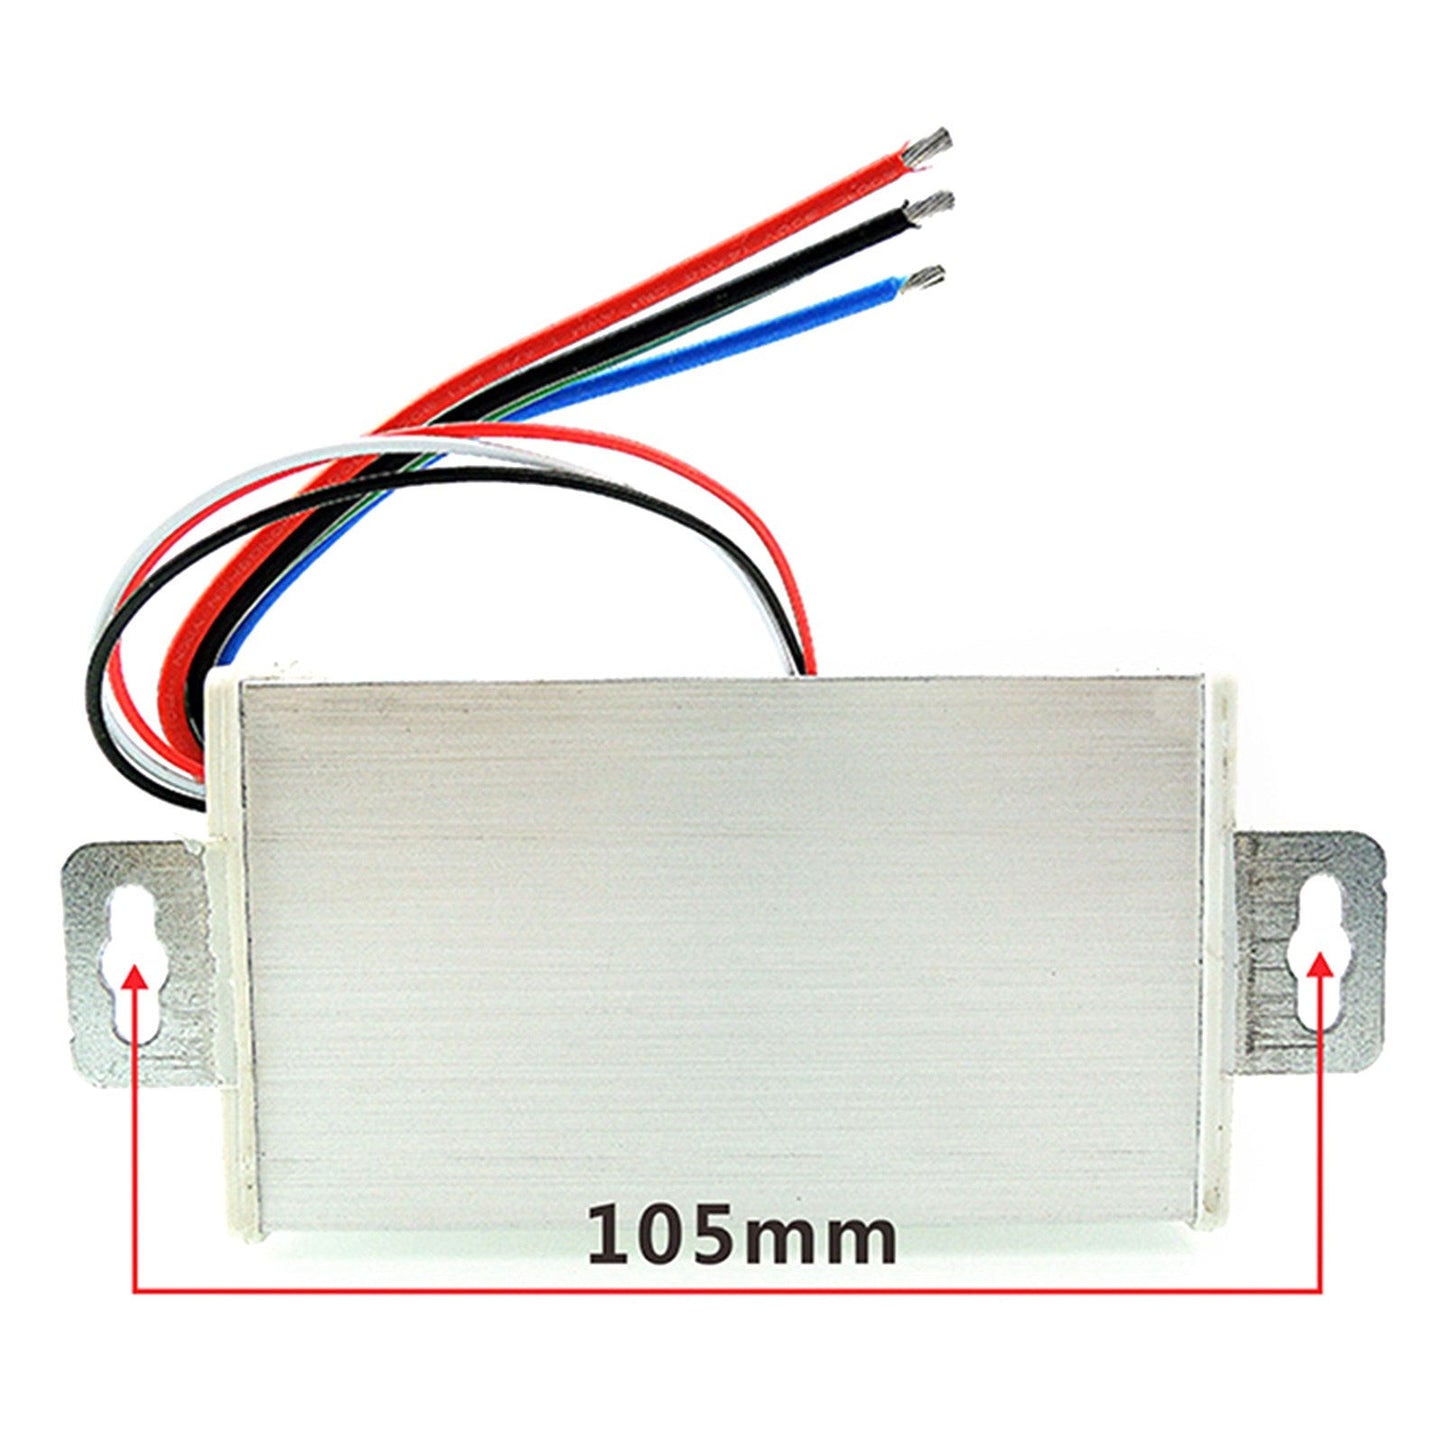 12V 24V Max 20A PWM DC Motor Stepless Variable Speed Control Controller Switch